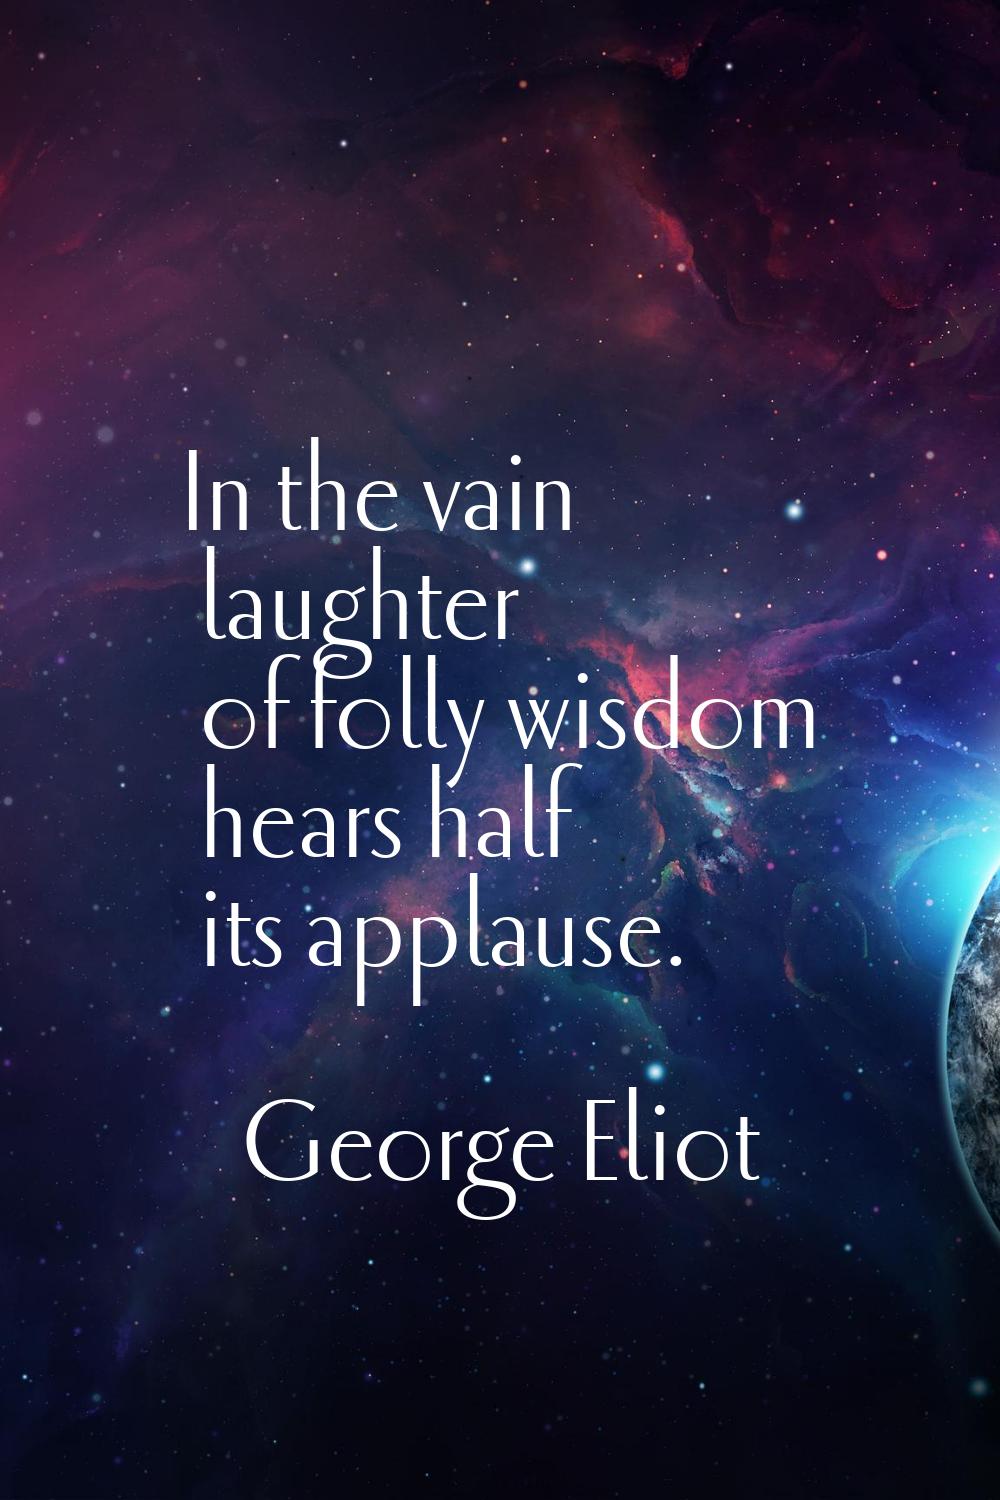 In the vain laughter of folly wisdom hears half its applause.